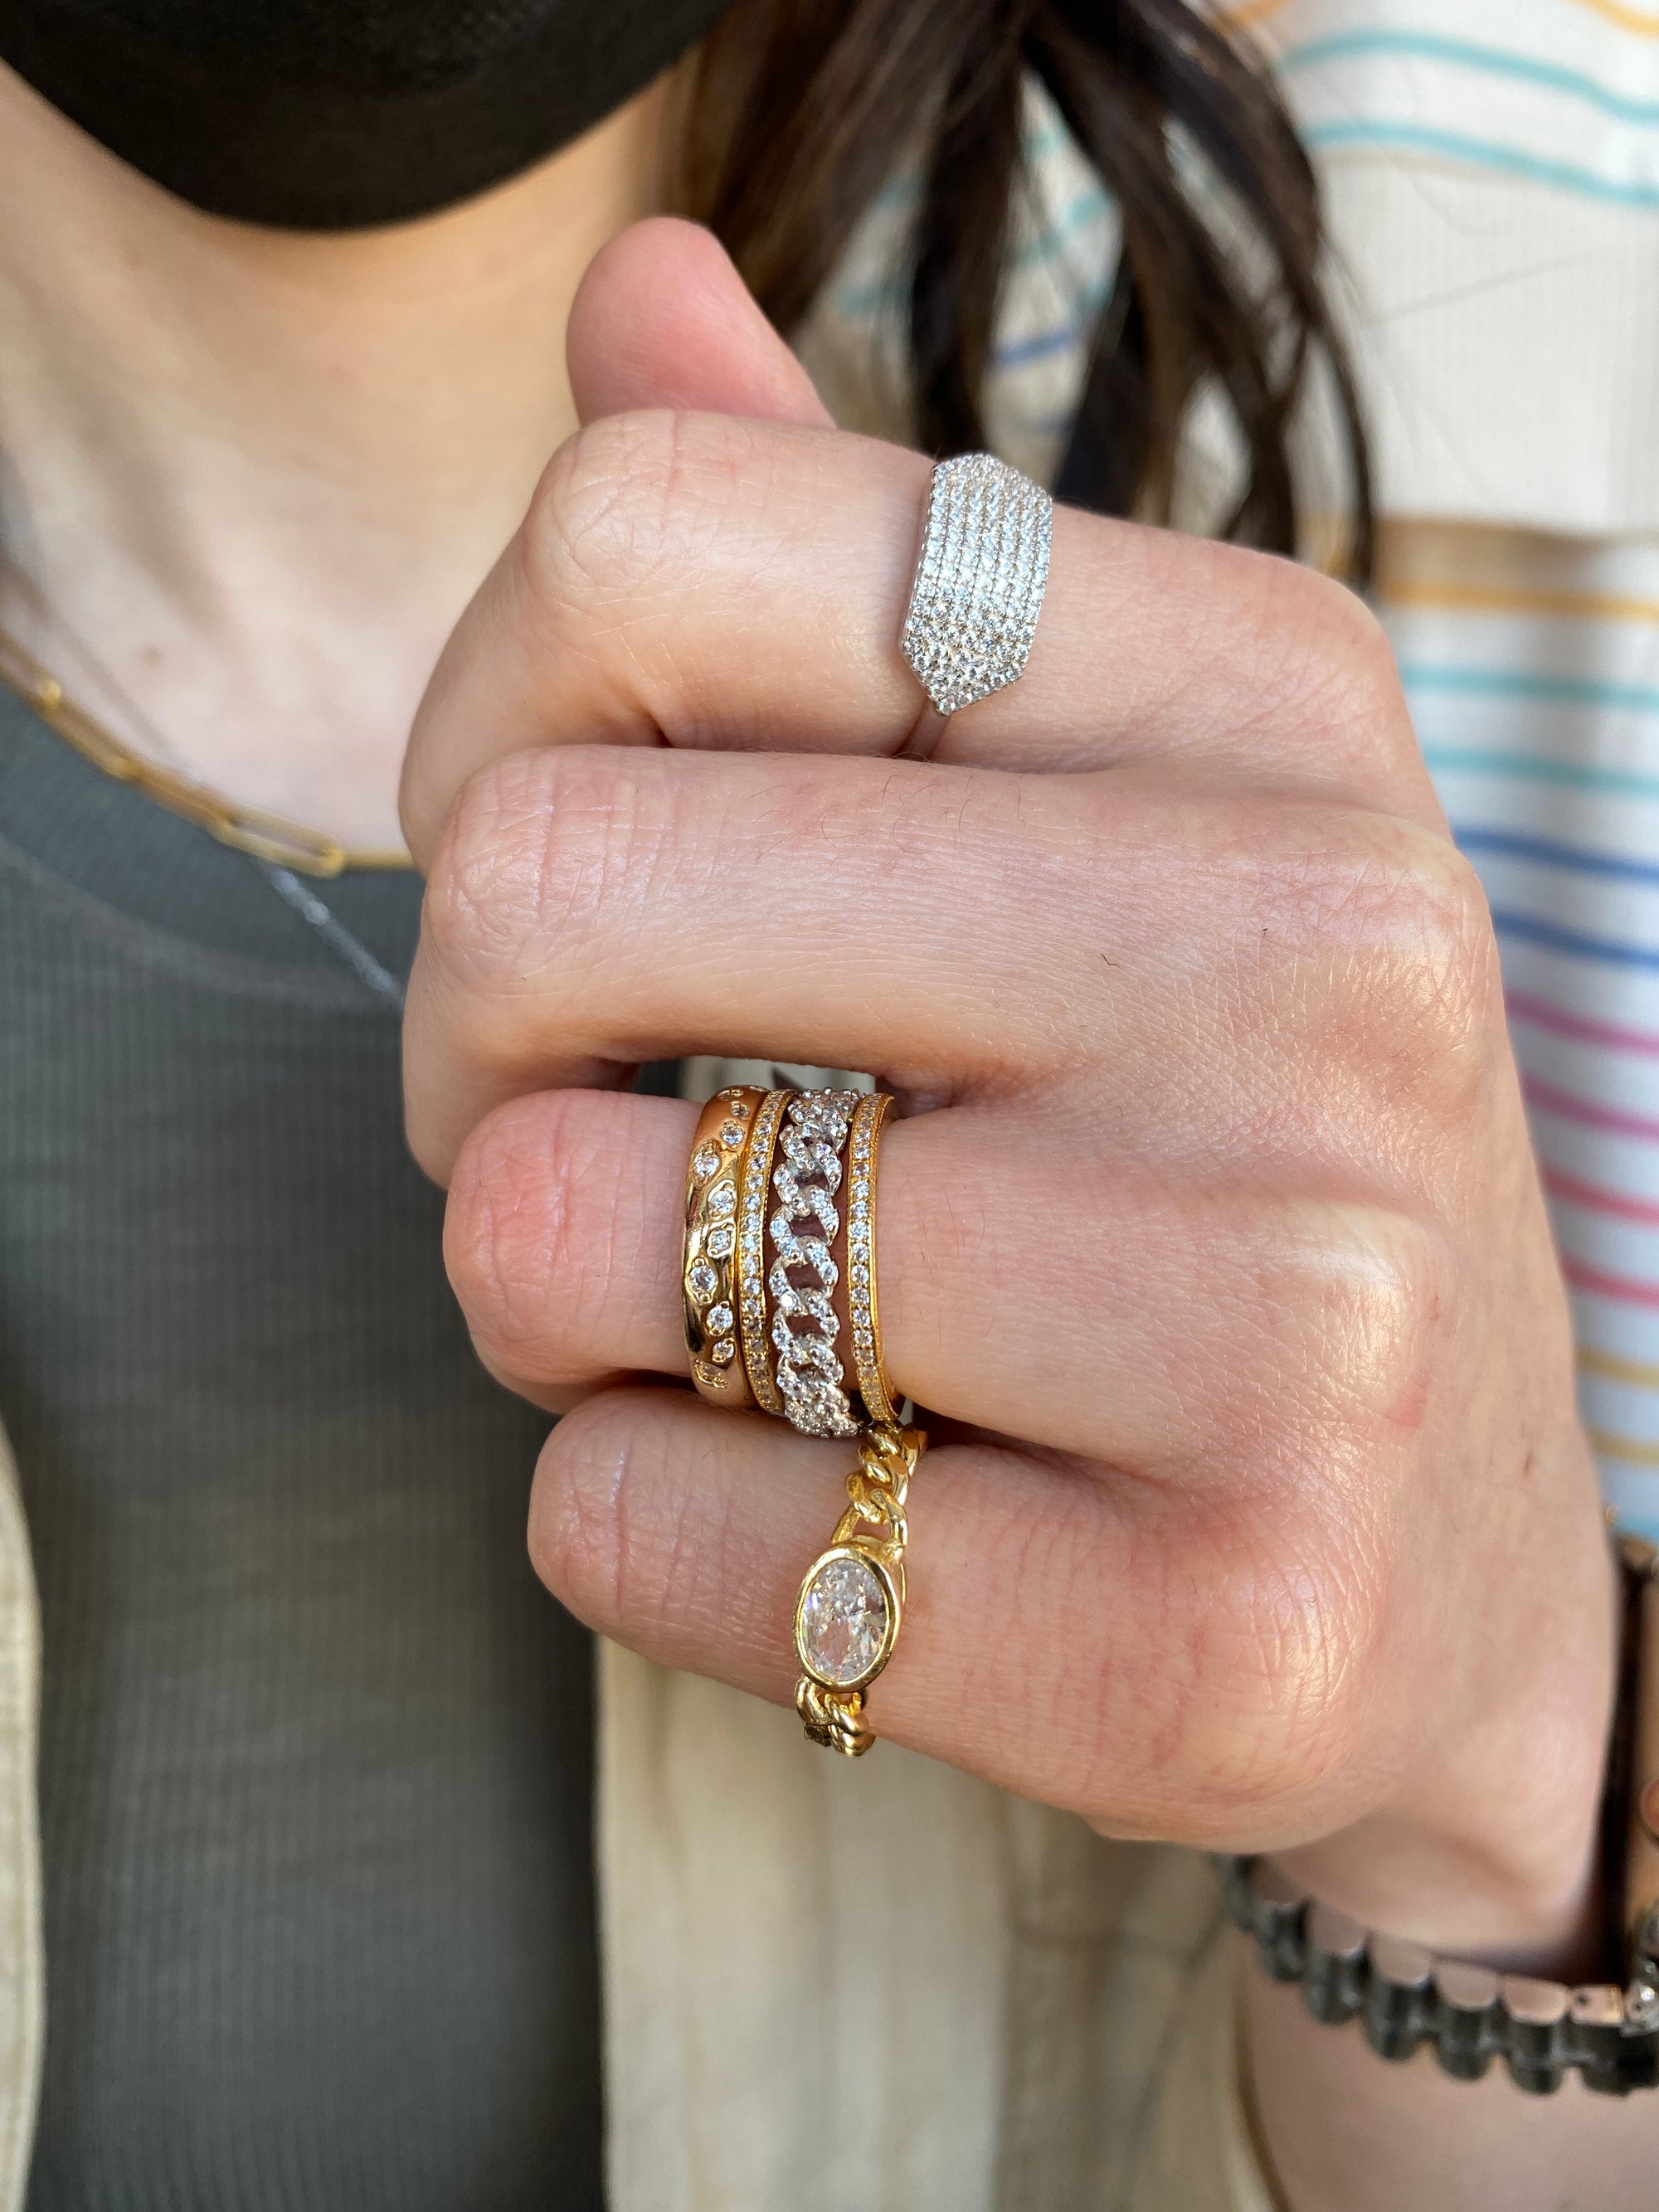 18k Gold Chain Ring, Cuban Link Ring, Dainty Chain Ring, Stacking Ring,  Minimalist Ring, Curb Chain Ring, Gift for Women - Etsy